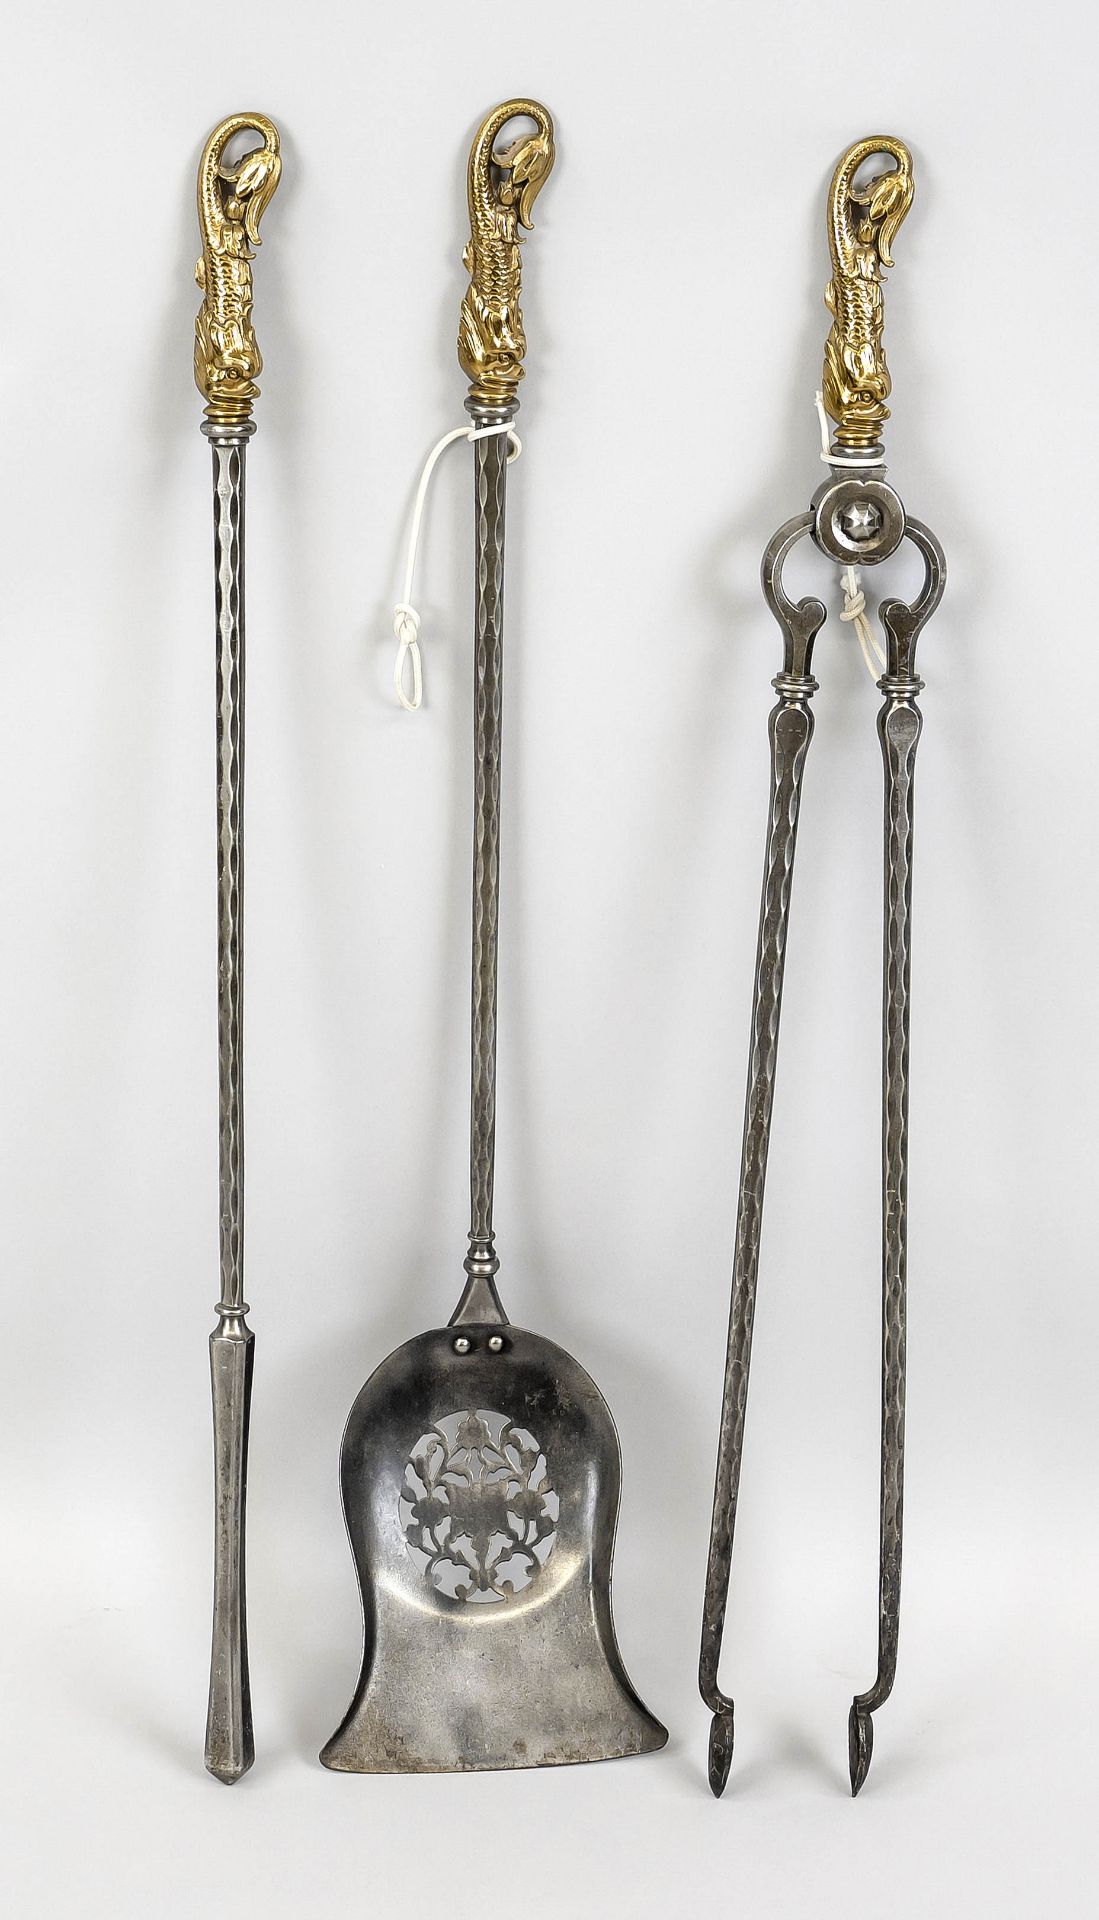 Renaissance-style fireplace set, 20th century, iron/brass. Consisting of tongs, poker and shovel, l.